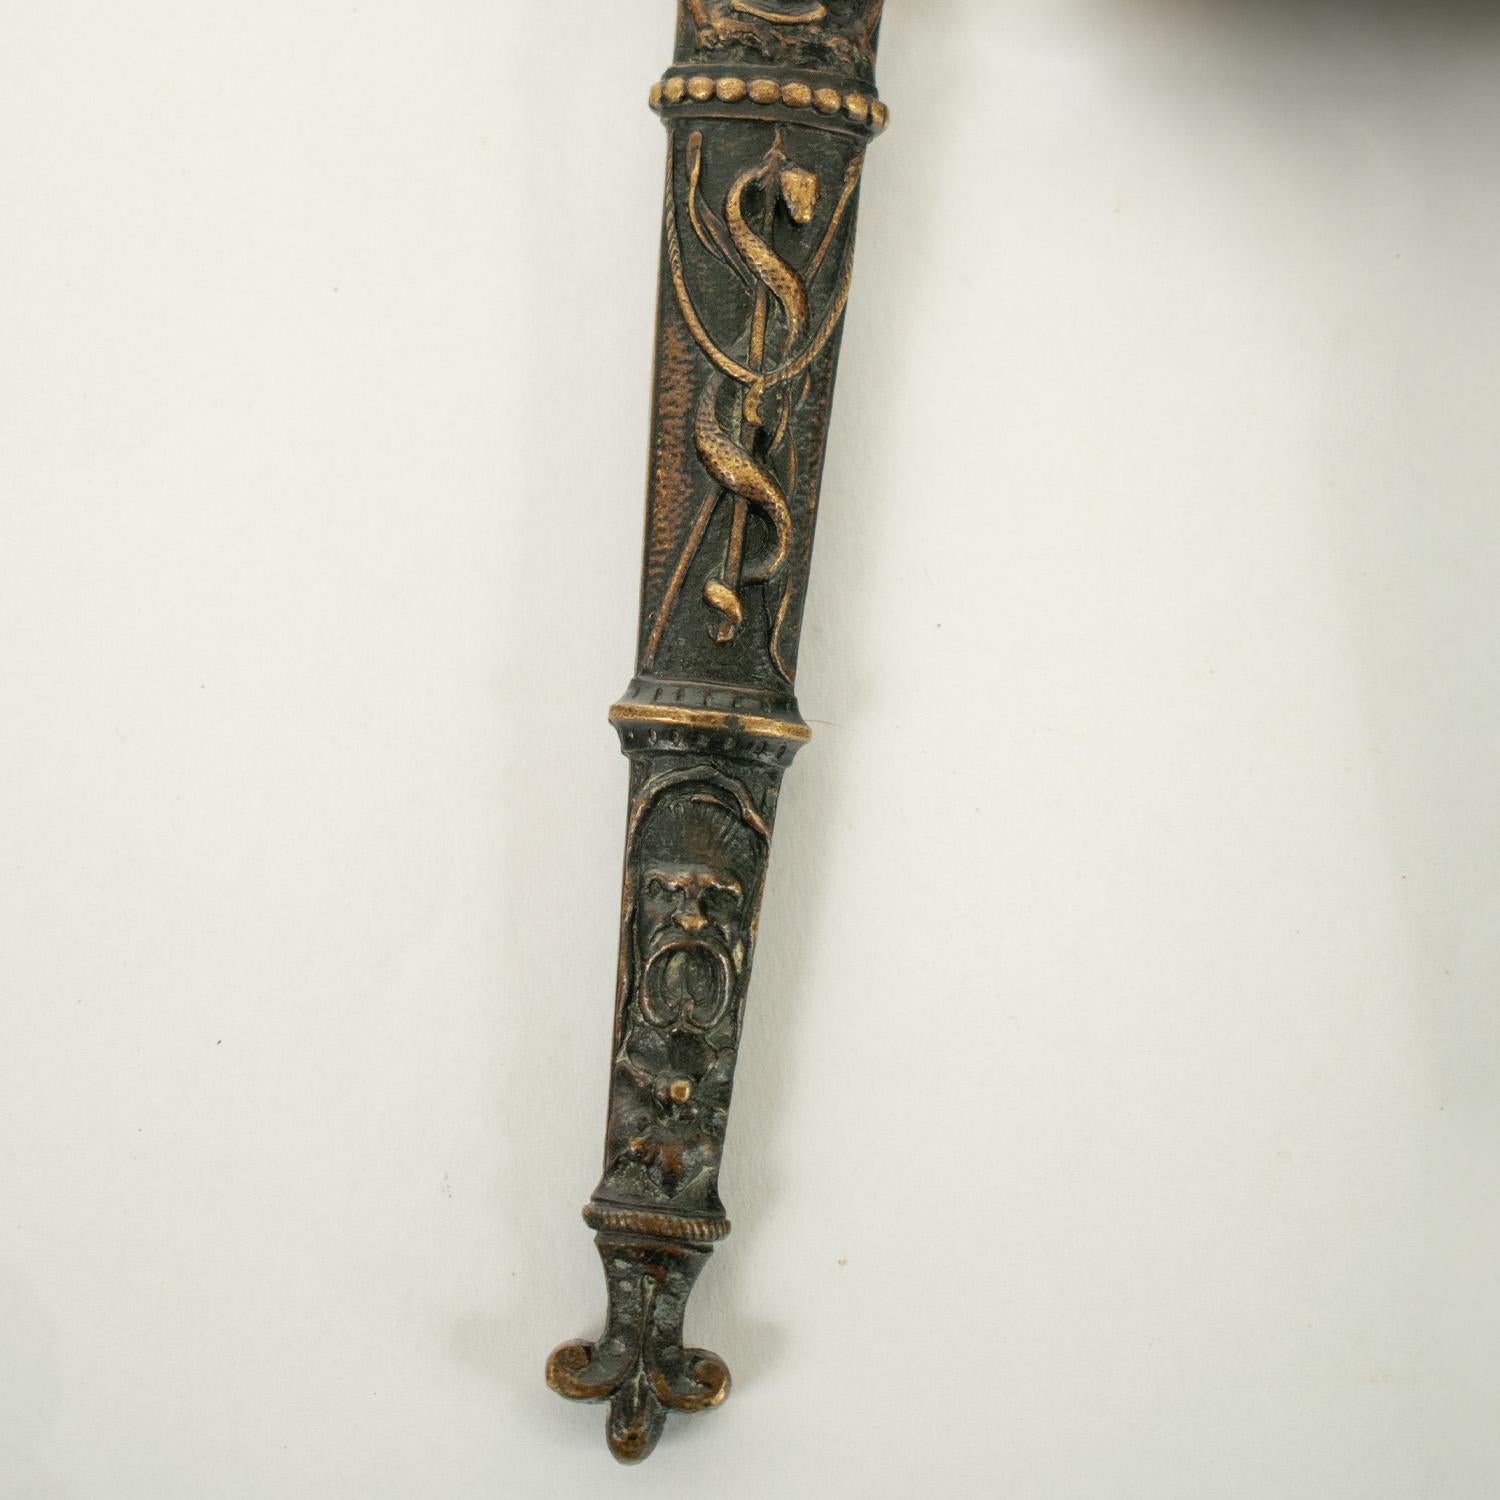 AMERICAN THEMED Romantic Dagger - early to mid 19th century - Spanish For Sale 4